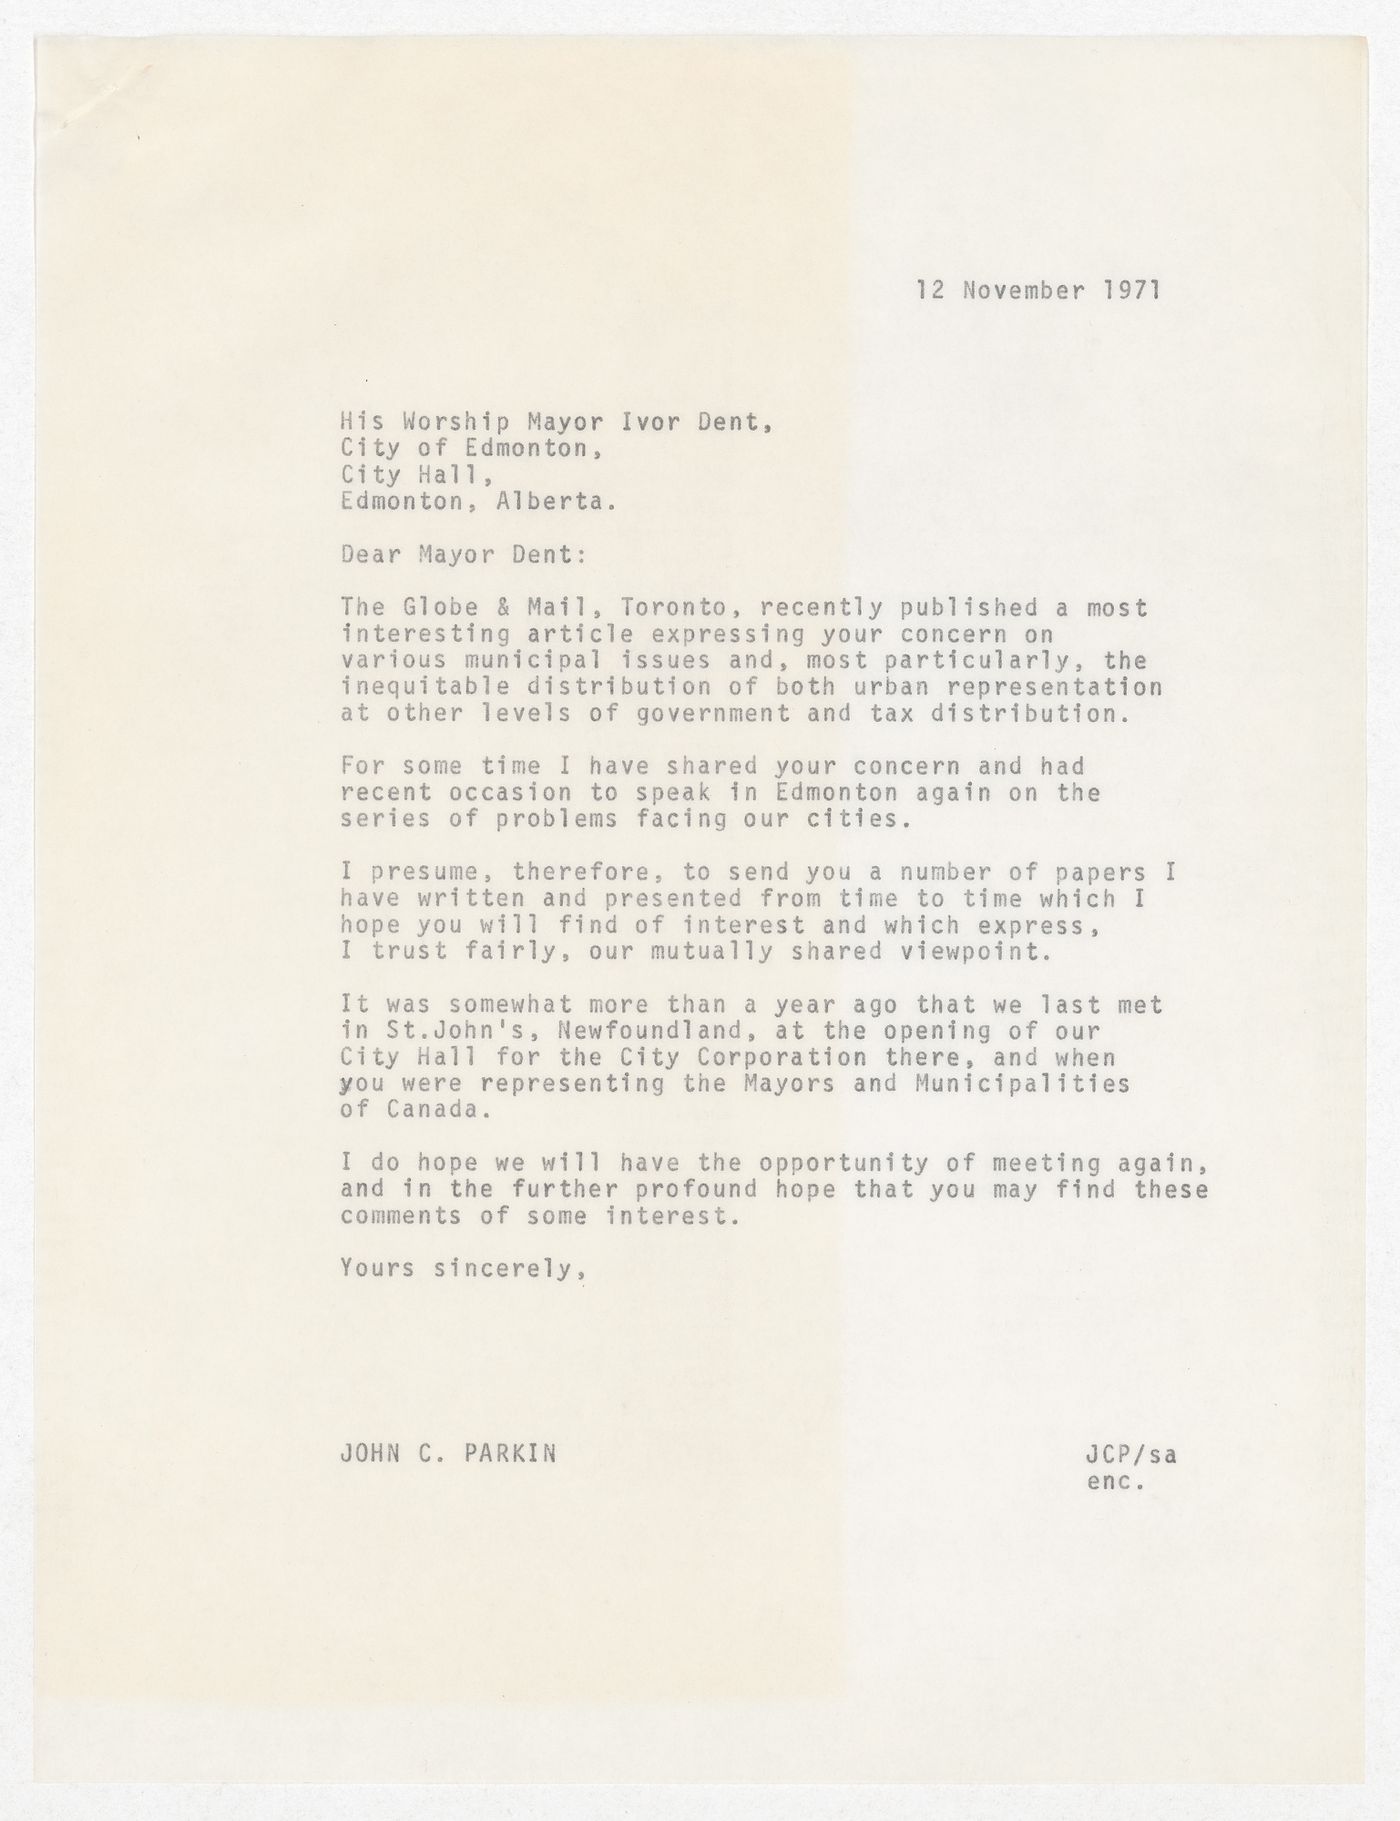 Letter from John C. Parkin to Edmonton Mayor Ivor Dent with attached newspaper clipping